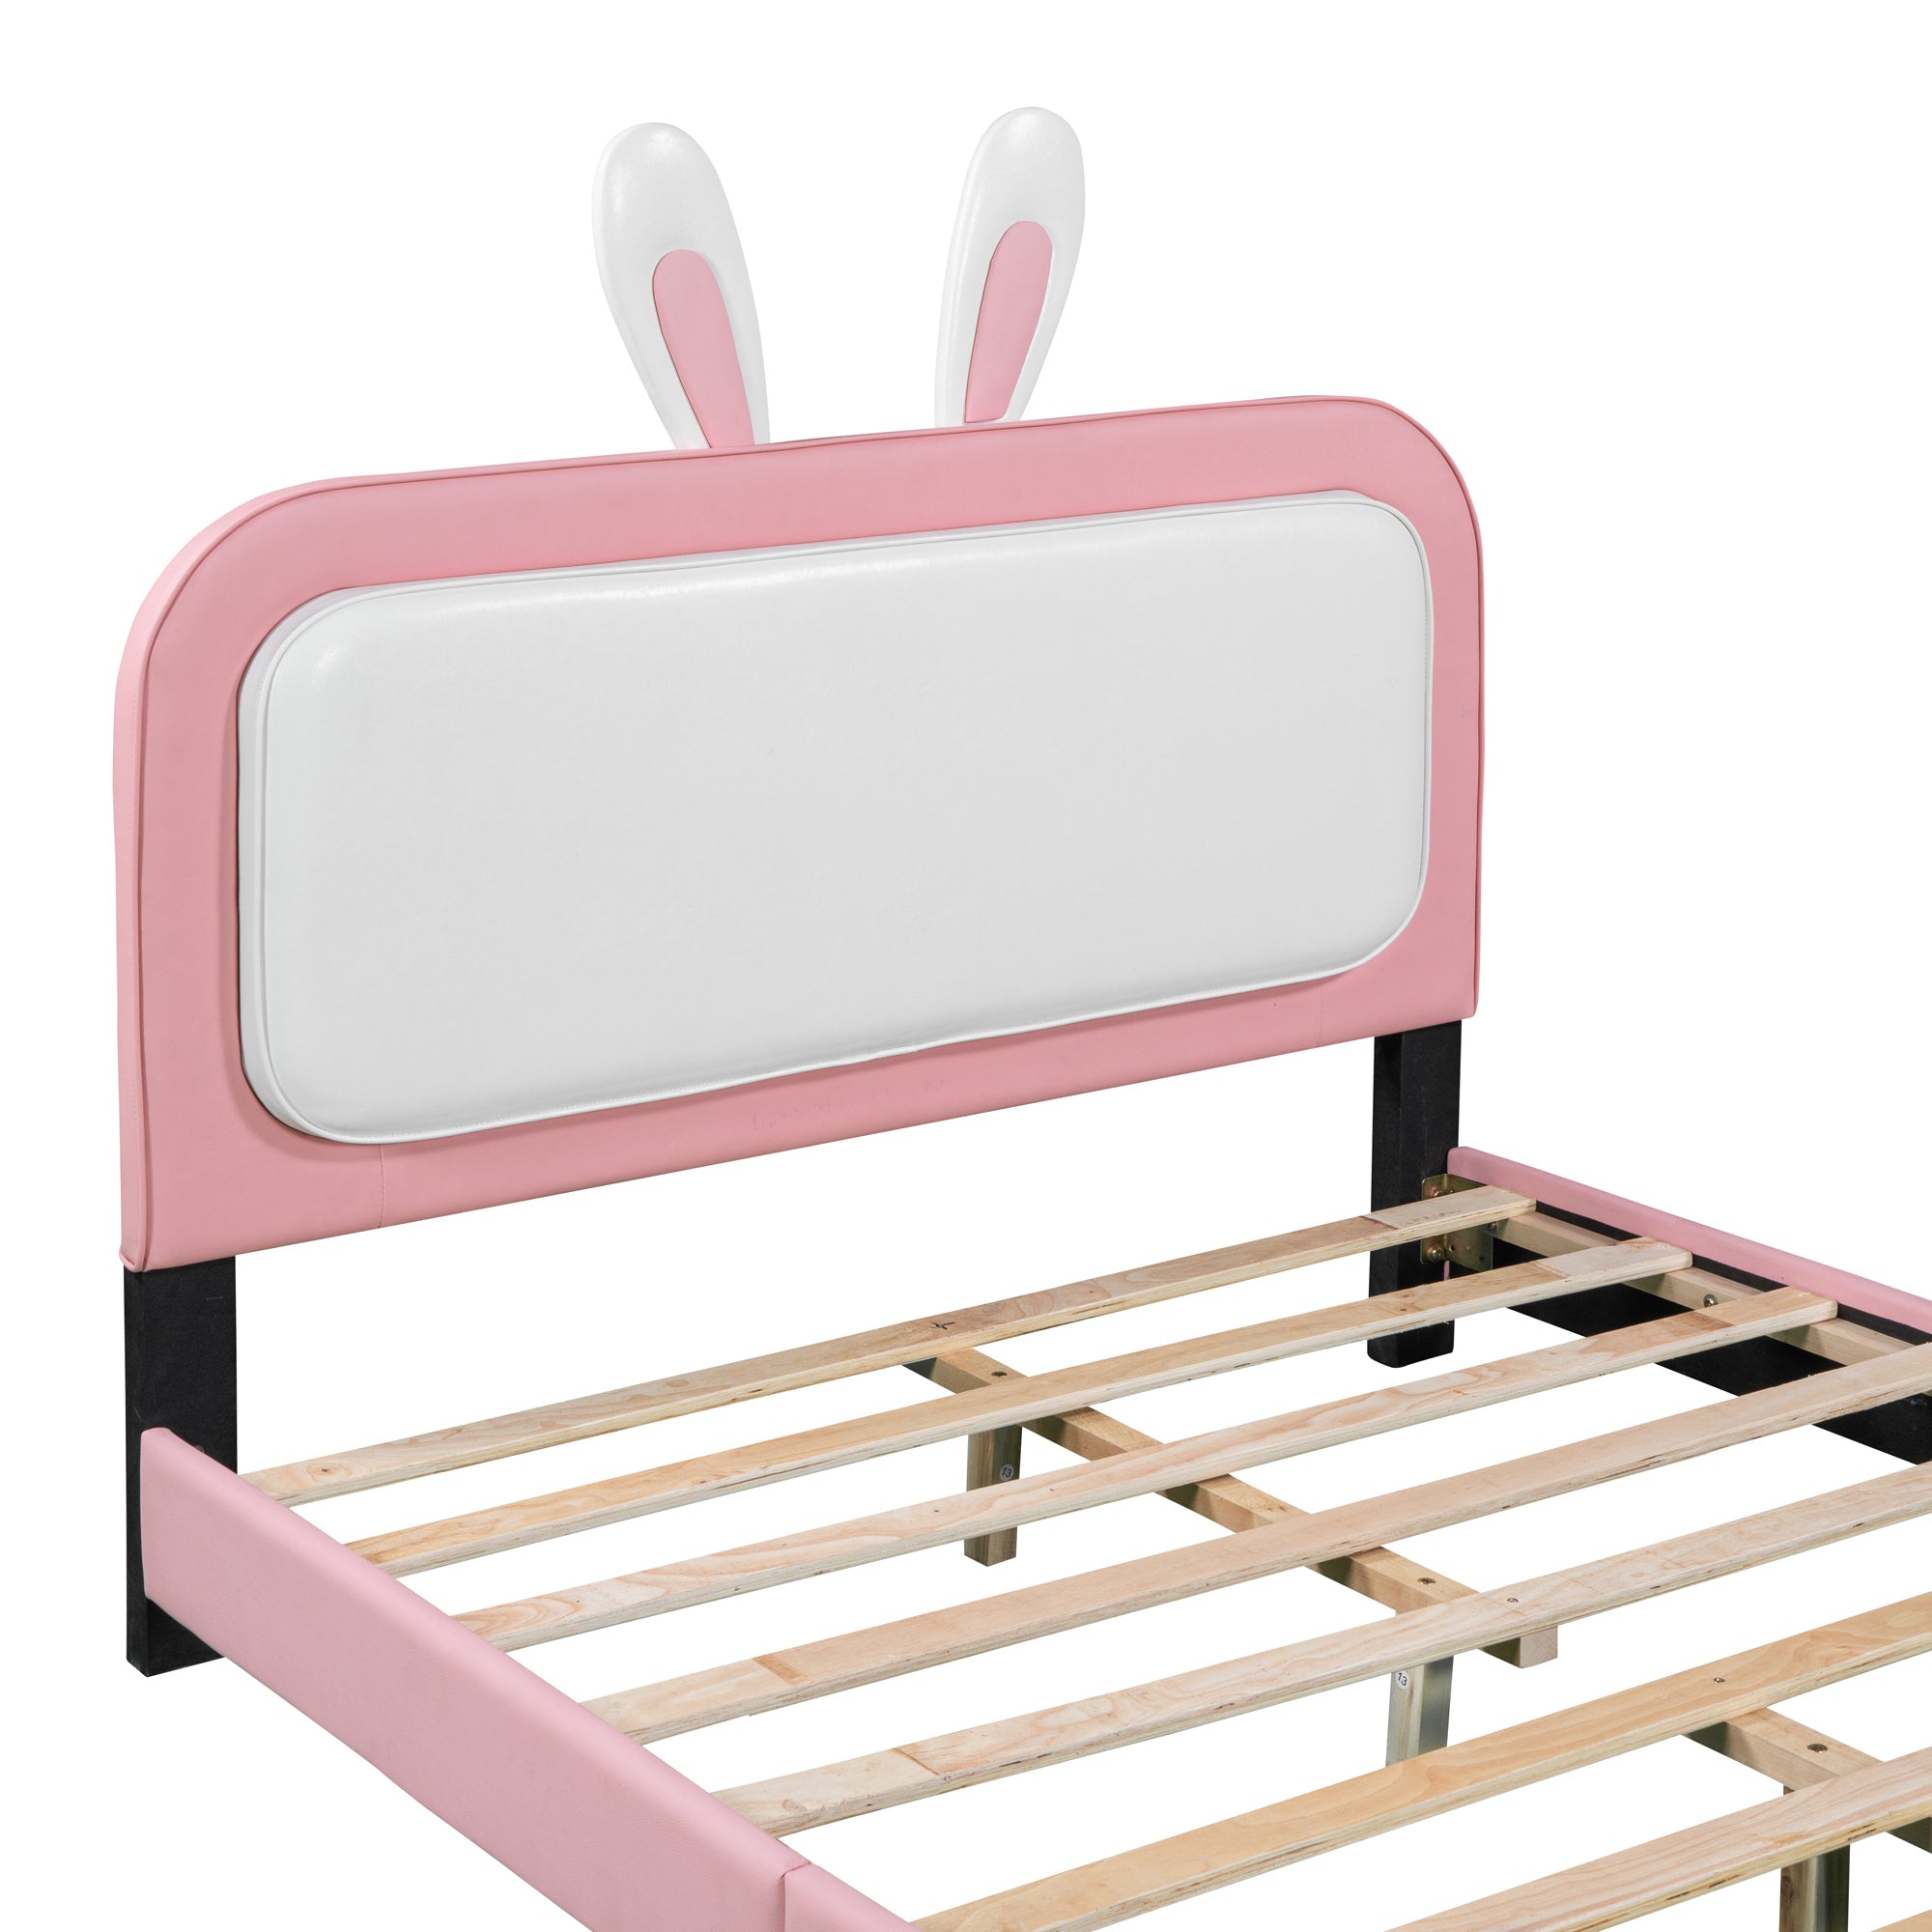 Bunny Twin or Full White and Pink Faux Leather Platform Bed